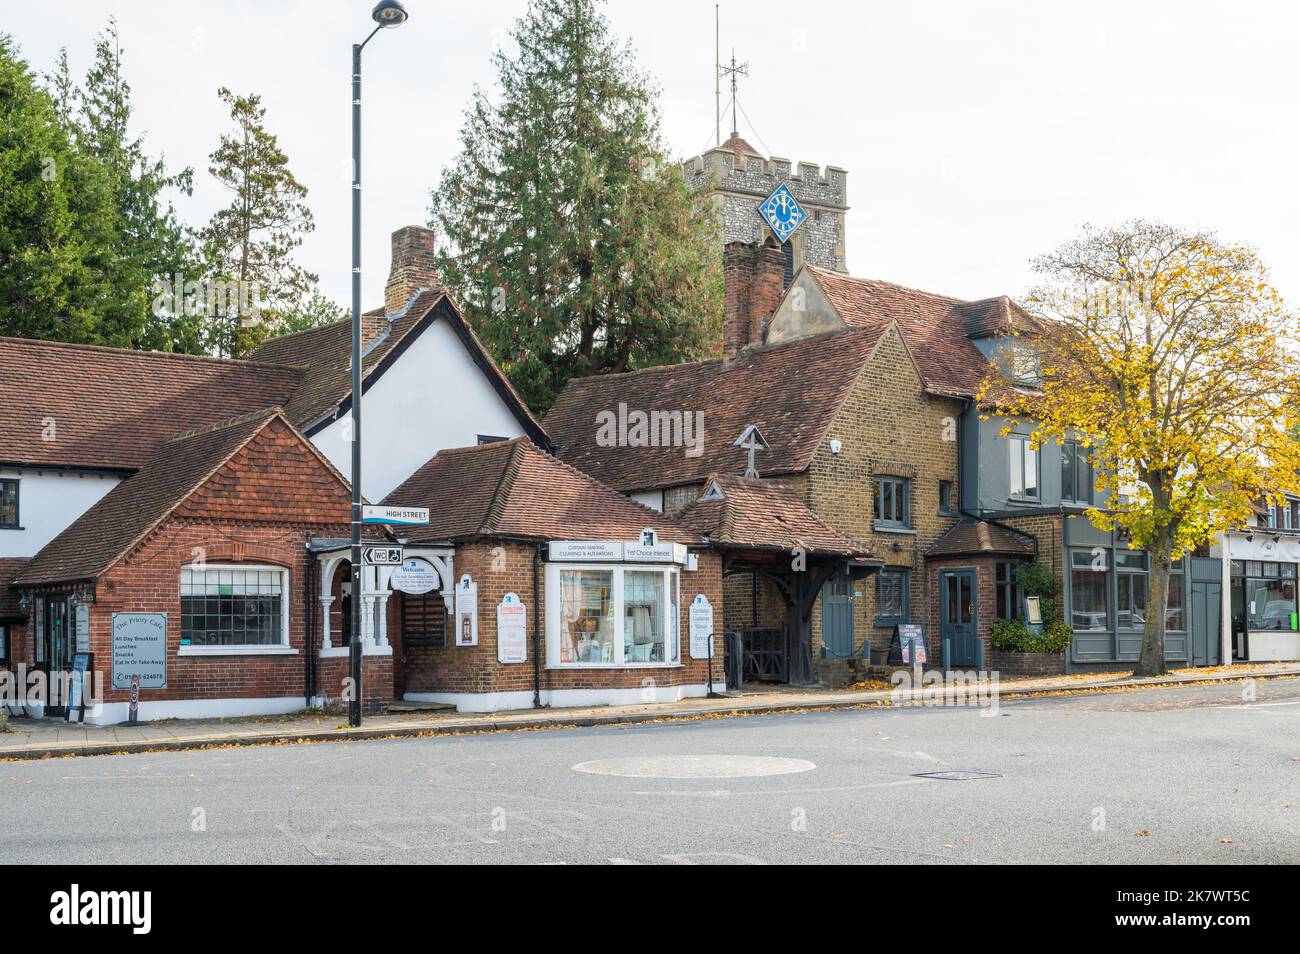 View of St Martins Church tower, the Priory Cafe and shops on High Street, Ruislip, Middlesex, England, UK Stock Photo